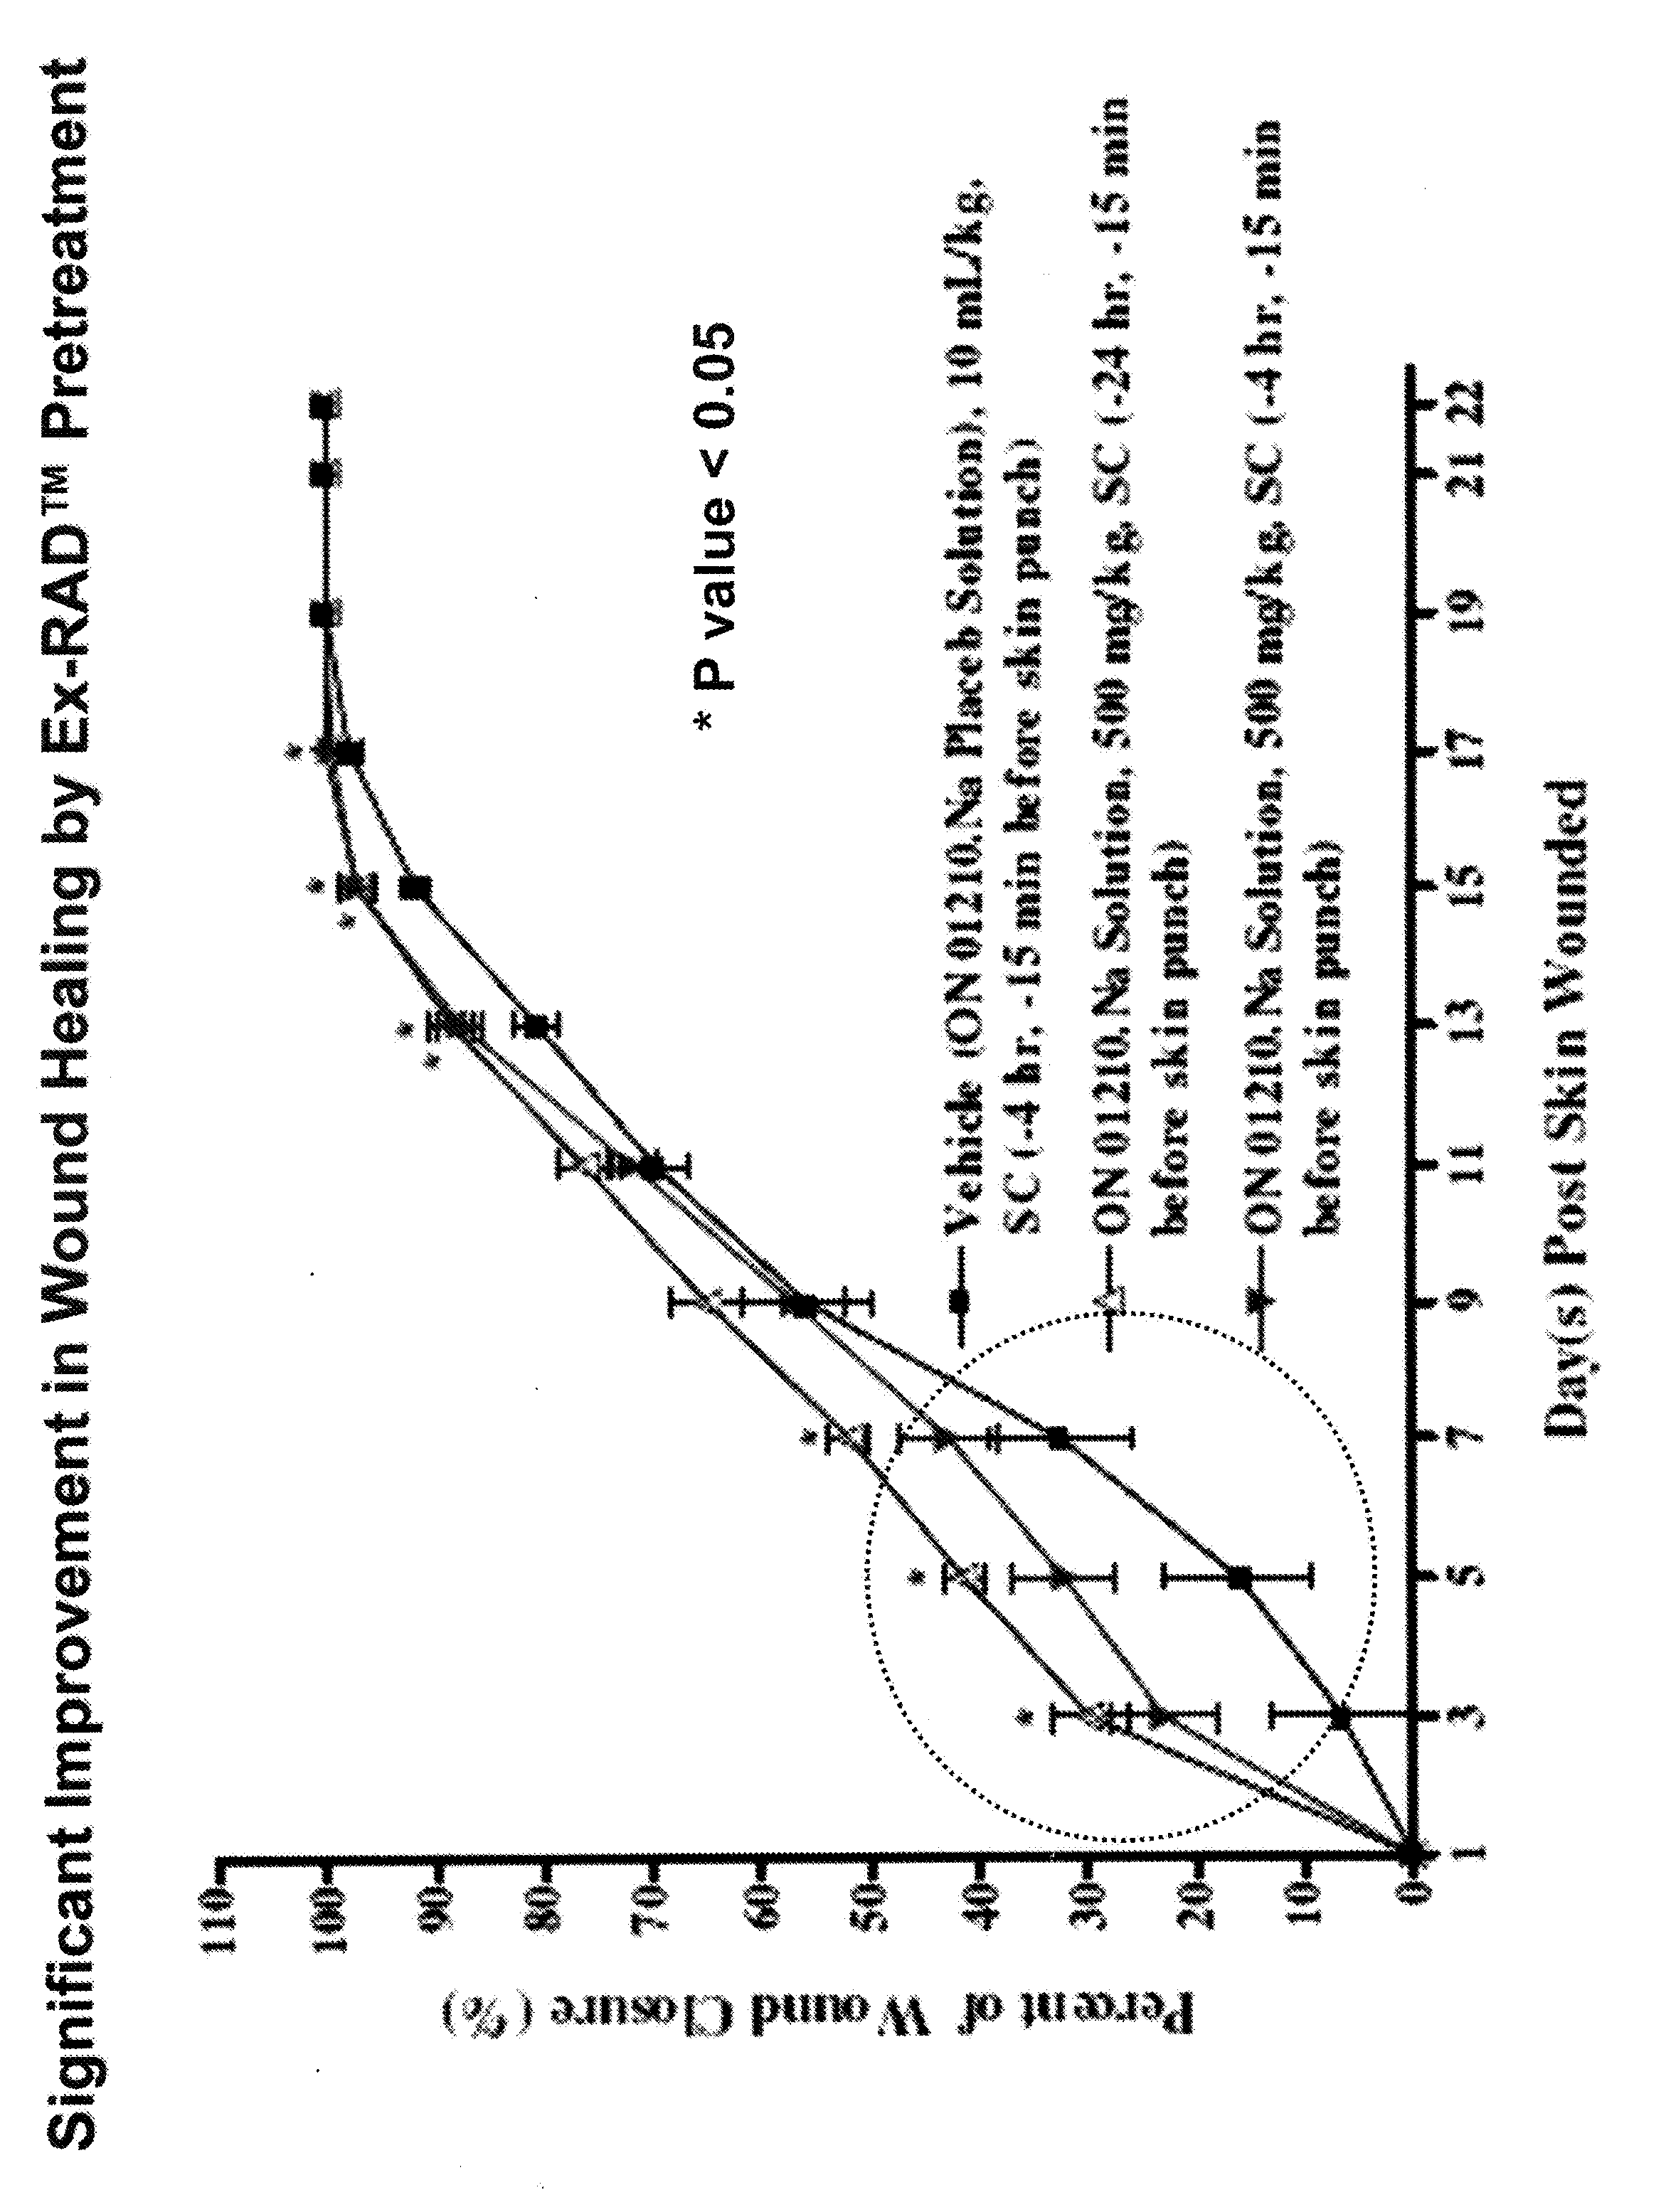 Compositions and methods for prevention and treatement of wounds